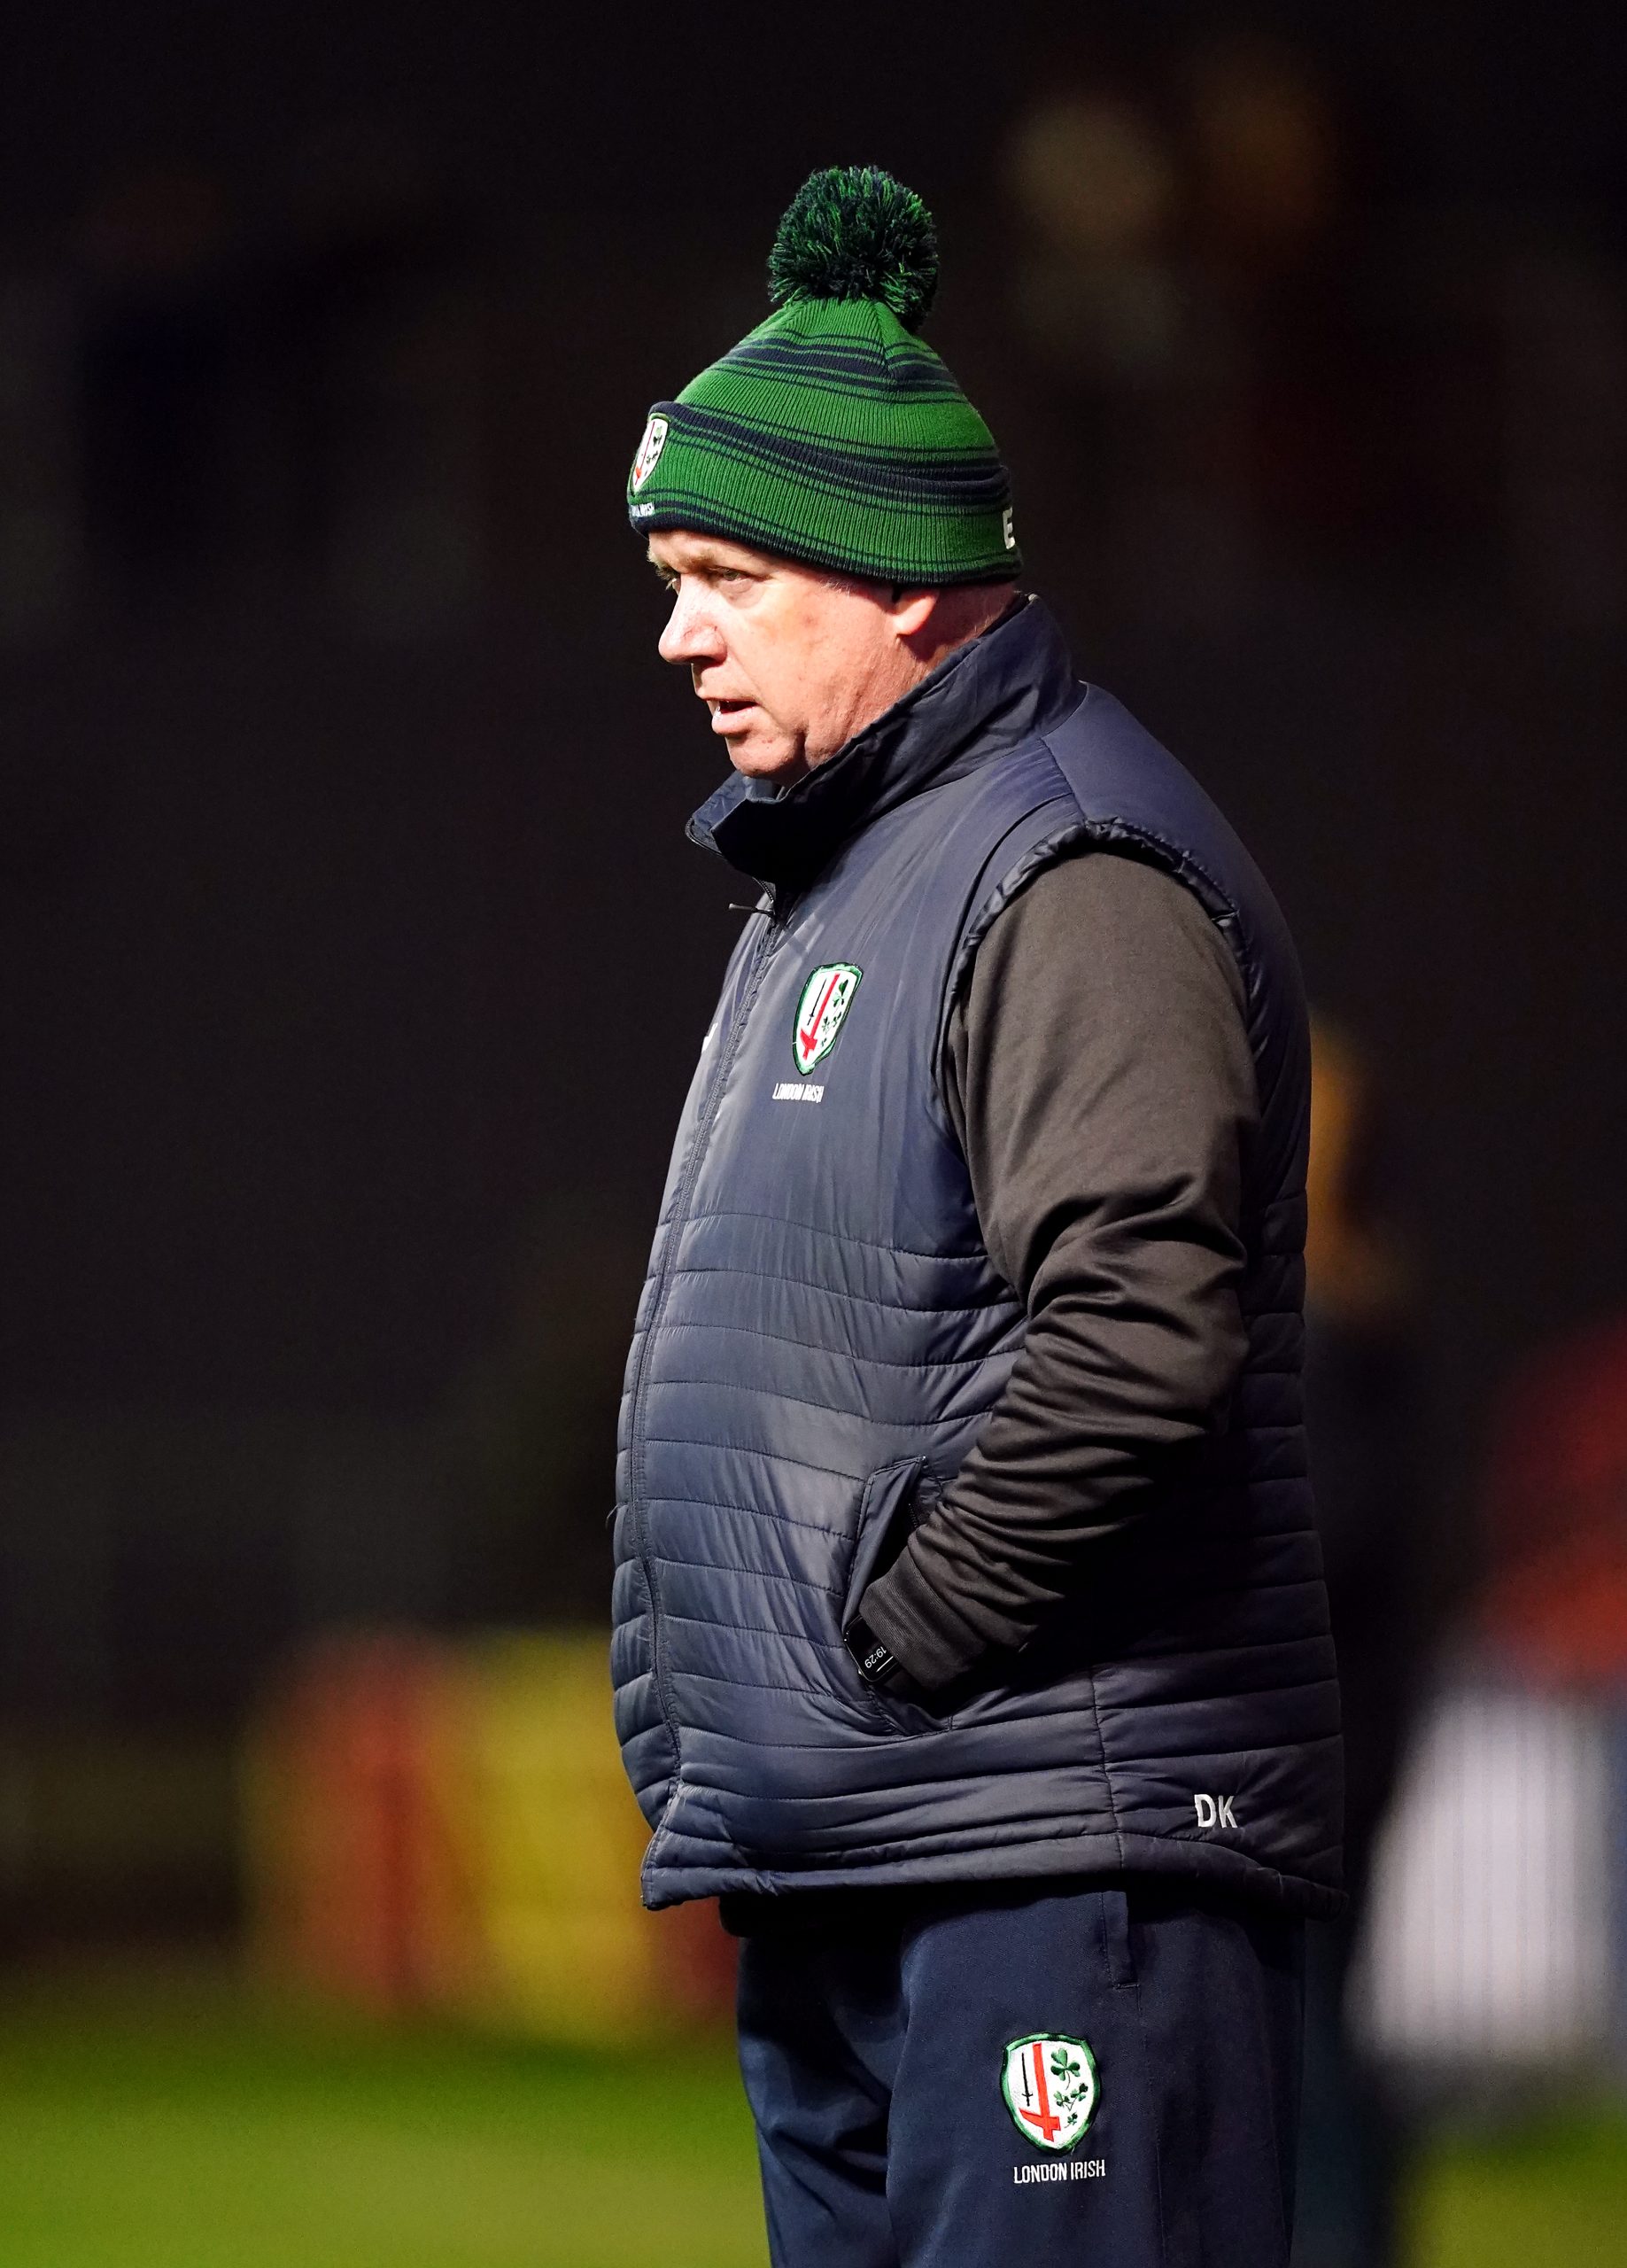 Declan Kidney to ‘keep the flag flying’ at London Irish despite wait for wages